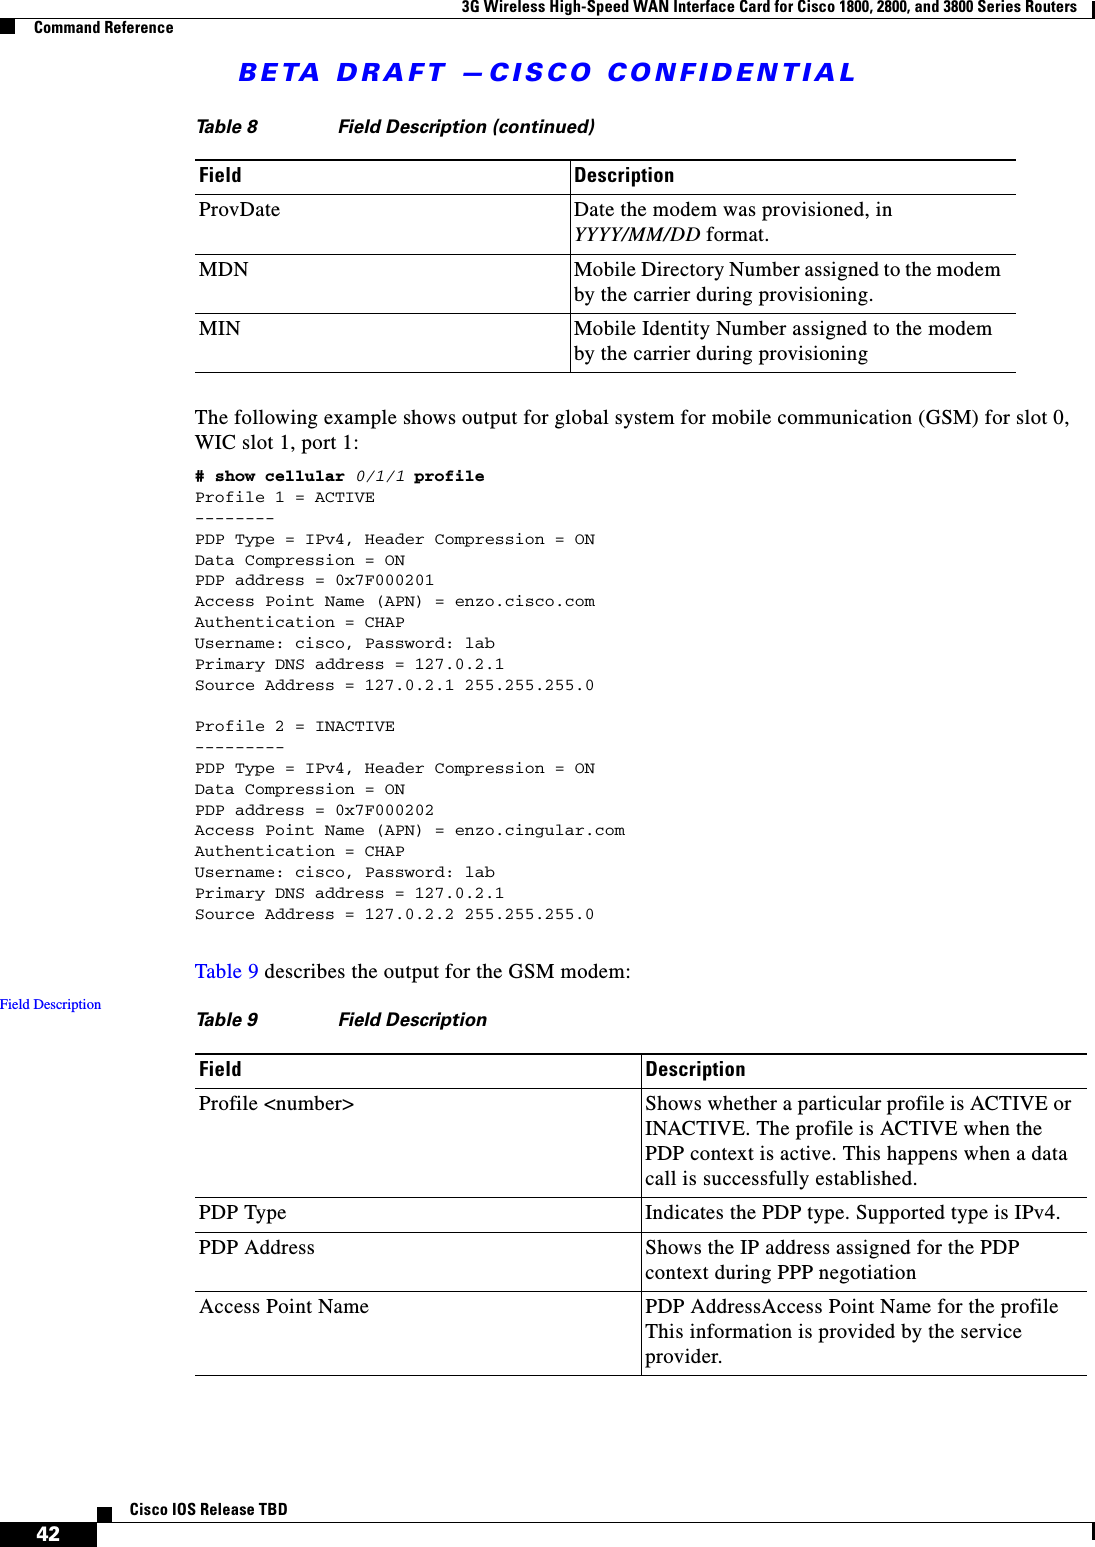 BETA DRAFT —CISCO CONFIDENTIAL3G Wireless High-Speed WAN Interface Card for Cisco 1800, 2800, and 3800 Series RoutersCommand Reference42Cisco IOS Release TBDThe following example shows output for global system for mobile communication (GSM) for slot 0, WIC slot 1, port 1: # show cellular 0/1/1 profileProfile 1 = ACTIVE--------PDP Type = IPv4, Header Compression = ONData Compression = ONPDP address = 0x7F000201Access Point Name (APN) = enzo.cisco.comAuthentication = CHAPUsername: cisco, Password: labPrimary DNS address = 127.0.2.1Source Address = 127.0.2.1 255.255.255.0 Profile 2 = INACTIVE---------PDP Type = IPv4, Header Compression = ONData Compression = ONPDP address = 0x7F000202Access Point Name (APN) = enzo.cingular.comAuthentication = CHAPUsername: cisco, Password: labPrimary DNS address = 127.0.2.1Source Address = 127.0.2.2 255.255.255.0Table 9 describes the output for the GSM modem:Field DescriptionProvDate  Date the modem was provisioned, in YYYY/MM/DD format.MDN Mobile Directory Number assigned to the modem by the carrier during provisioning.MIN Mobile Identity Number assigned to the modem by the carrier during provisioningTable 8 Field Description (continued)Field DescriptionTable 9 Field DescriptionField DescriptionProfile &lt;number&gt; Shows whether a particular profile is ACTIVE or INACTIVE. The profile is ACTIVE when the PDP context is active. This happens when a data call is successfully established.PDP Type Indicates the PDP type. Supported type is IPv4.PDP Address Shows the IP address assigned for the PDP context during PPP negotiationAccess Point Name PDP AddressAccess Point Name for the profile This information is provided by the service provider.